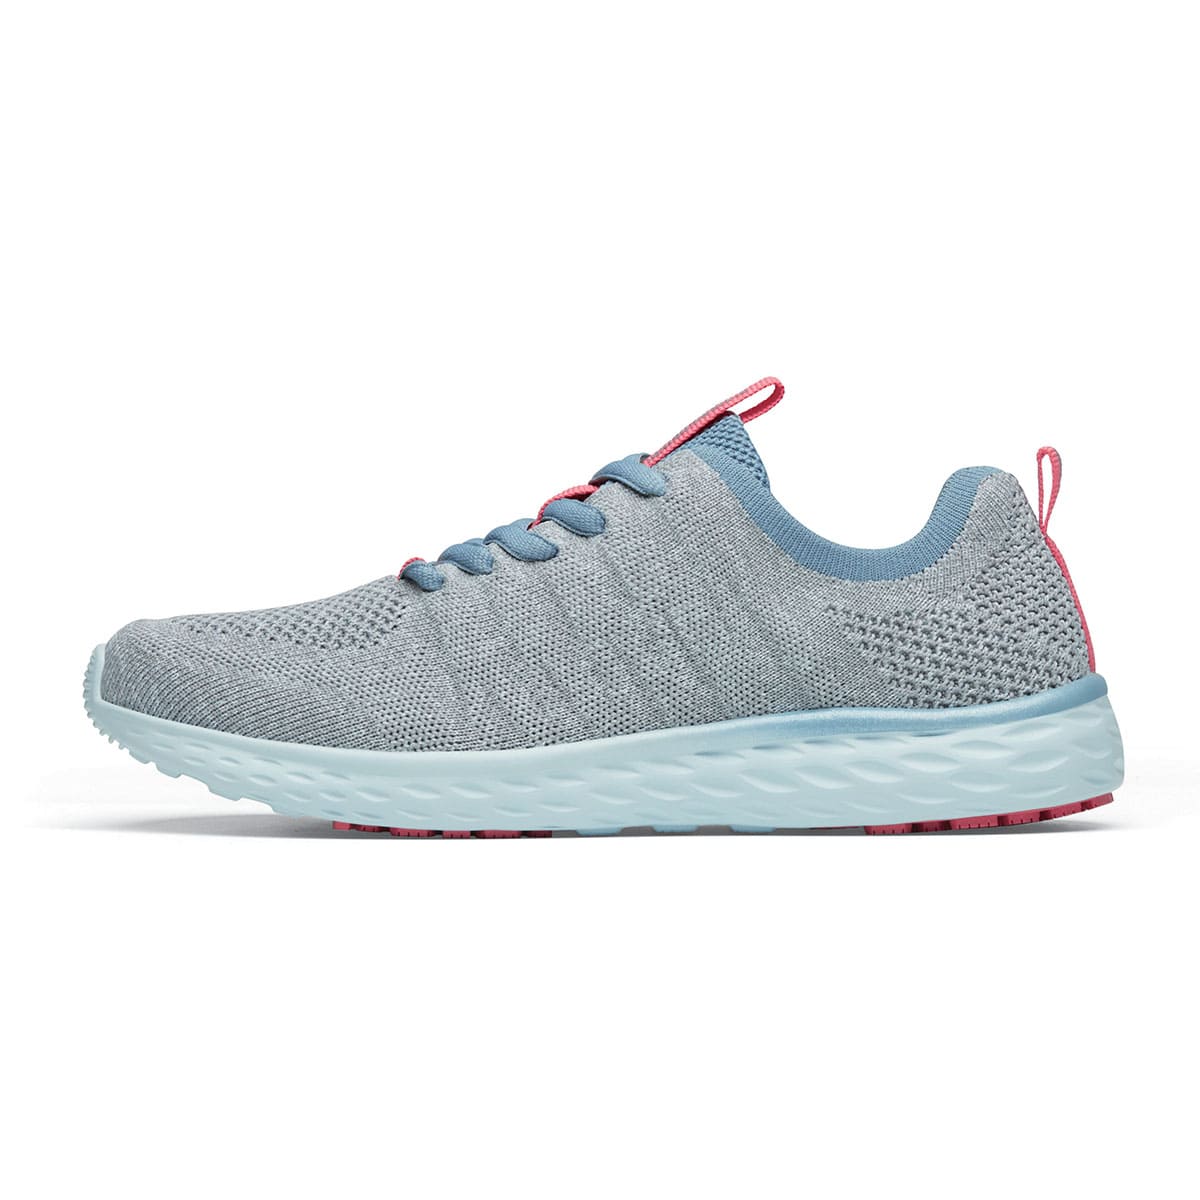 The Everlight Womens Gray/Blue/Coral from Shoes For Crews are slip-resistant trainers constructed with a breathable, water-resistant mesh upper,  seen from the left.